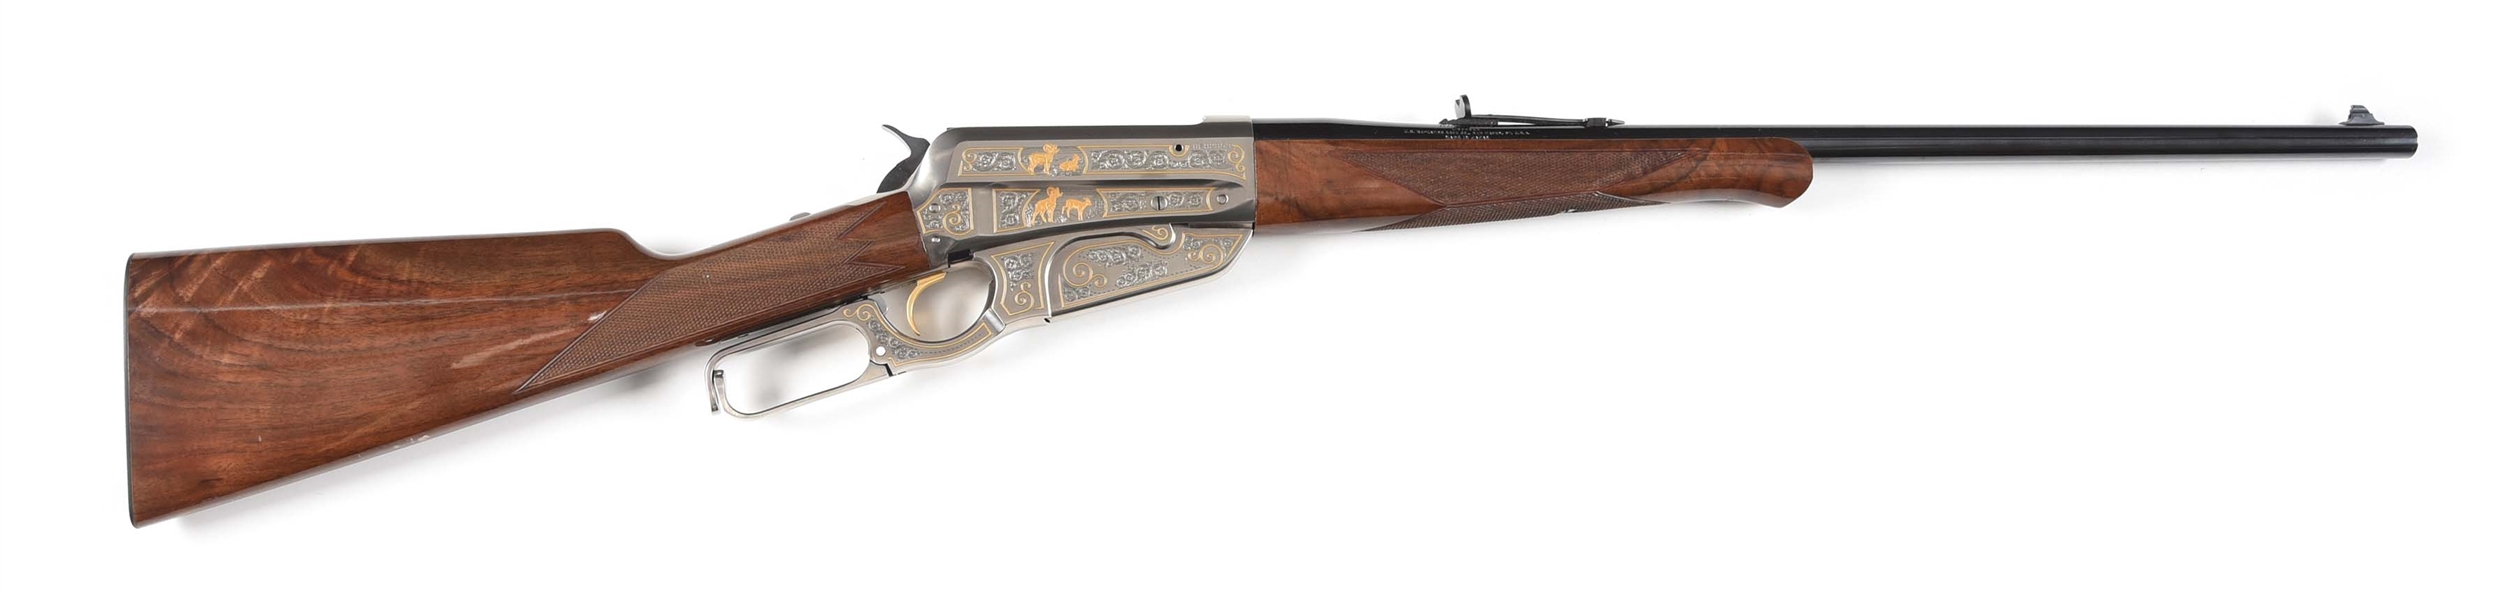 (M) WINCHESTER MODEL 1895 LIMITED EDITION LEVER ACTION RIFLE.